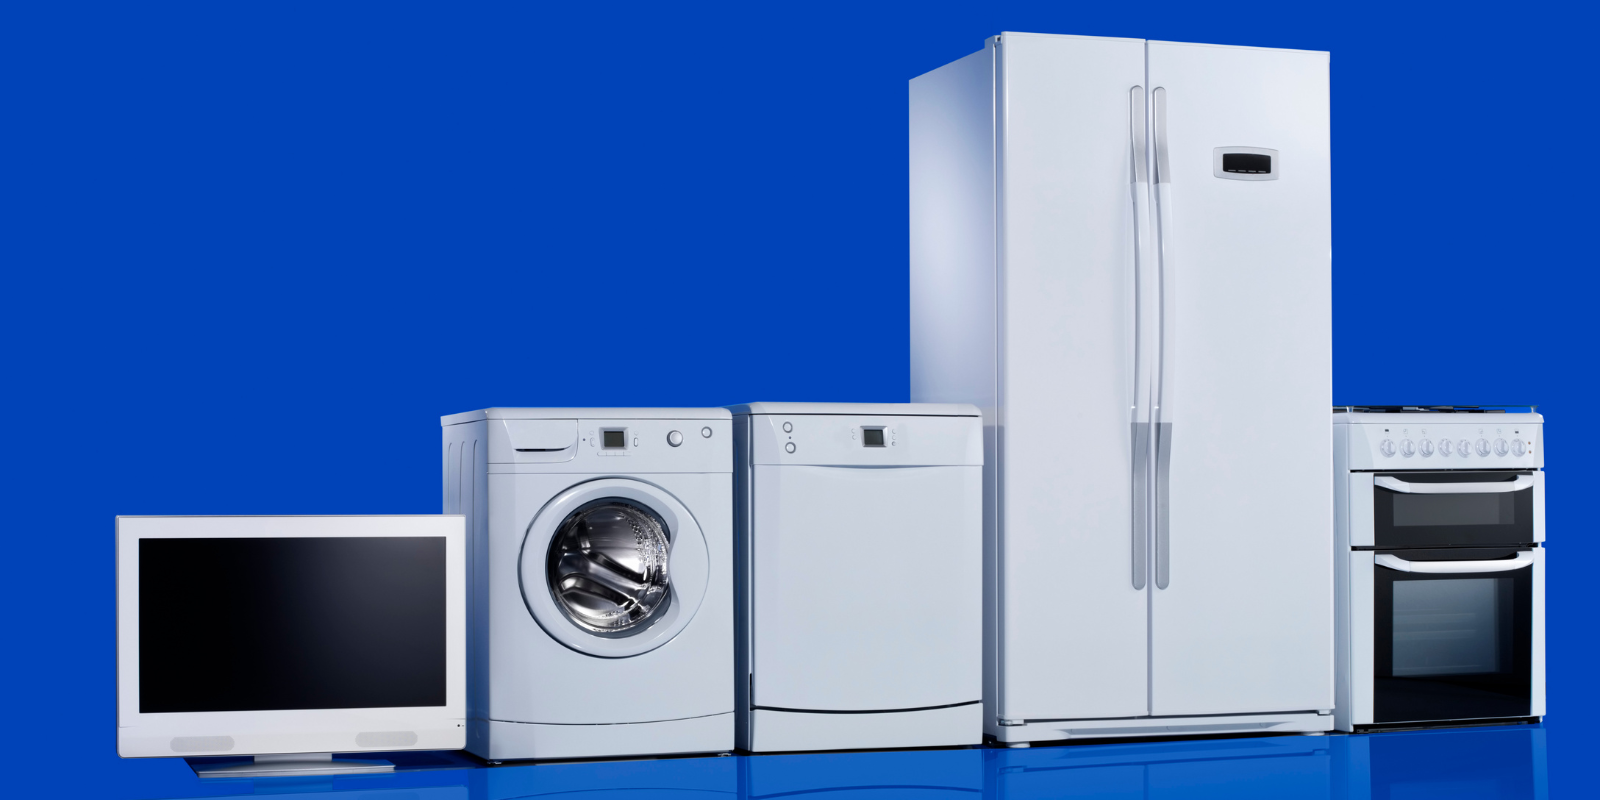 Home Appliances: The Biggest Energy Users